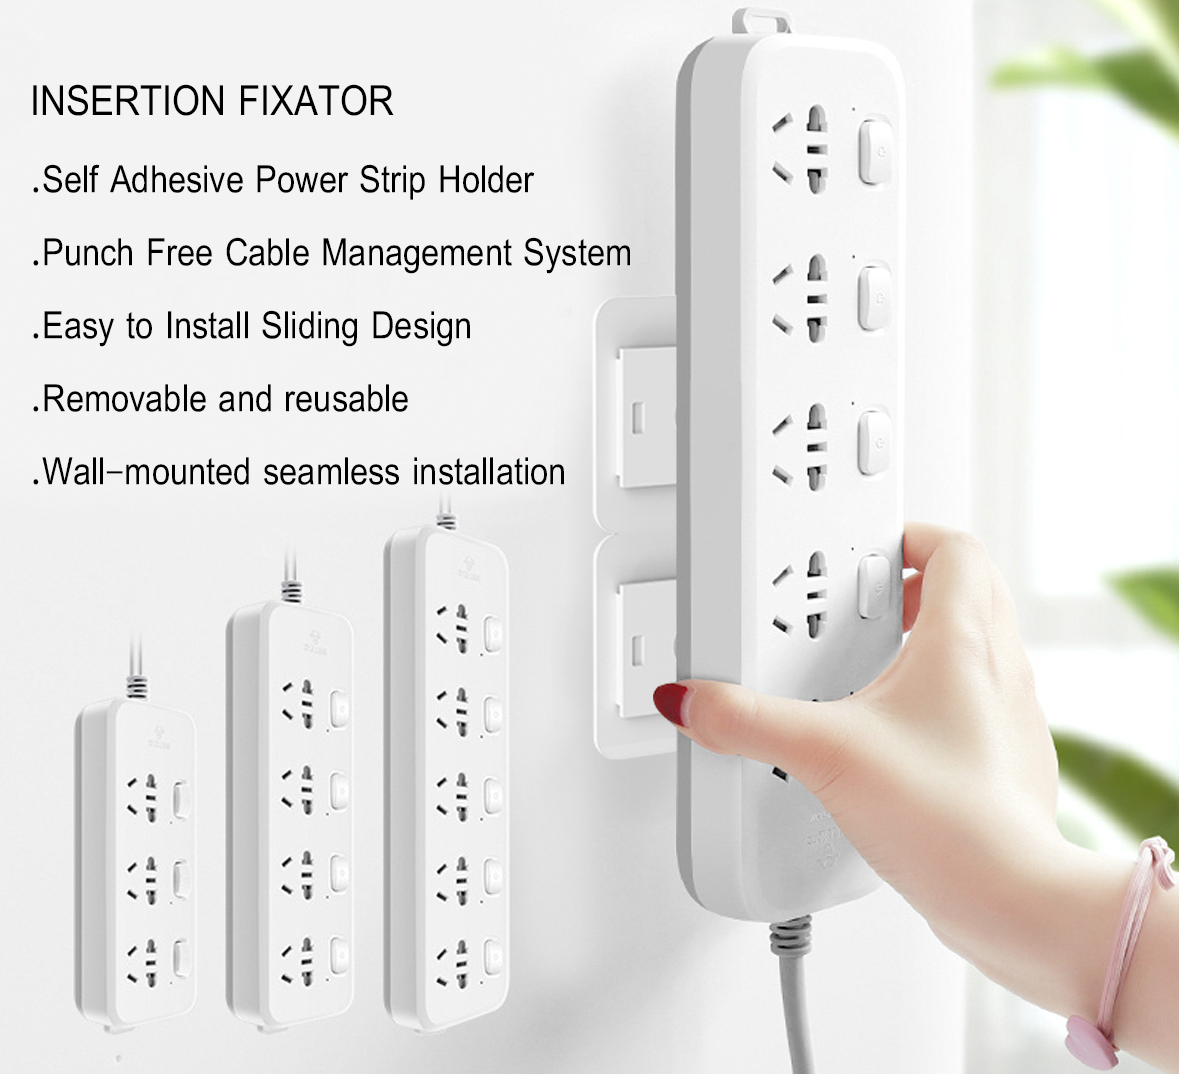 https://assets.umart.com.au/bdimages/upload1/20230223/Powerboards-and-Adapters-Self-Adhesive-Power-Strip-Holder-No-Drill-Extension-Block-Wall-Mount-Fixator-Easy-to-Install-Sliding-Design-Attaches-to-Wood-Plastic-Metal-Ceramic-18.jpg